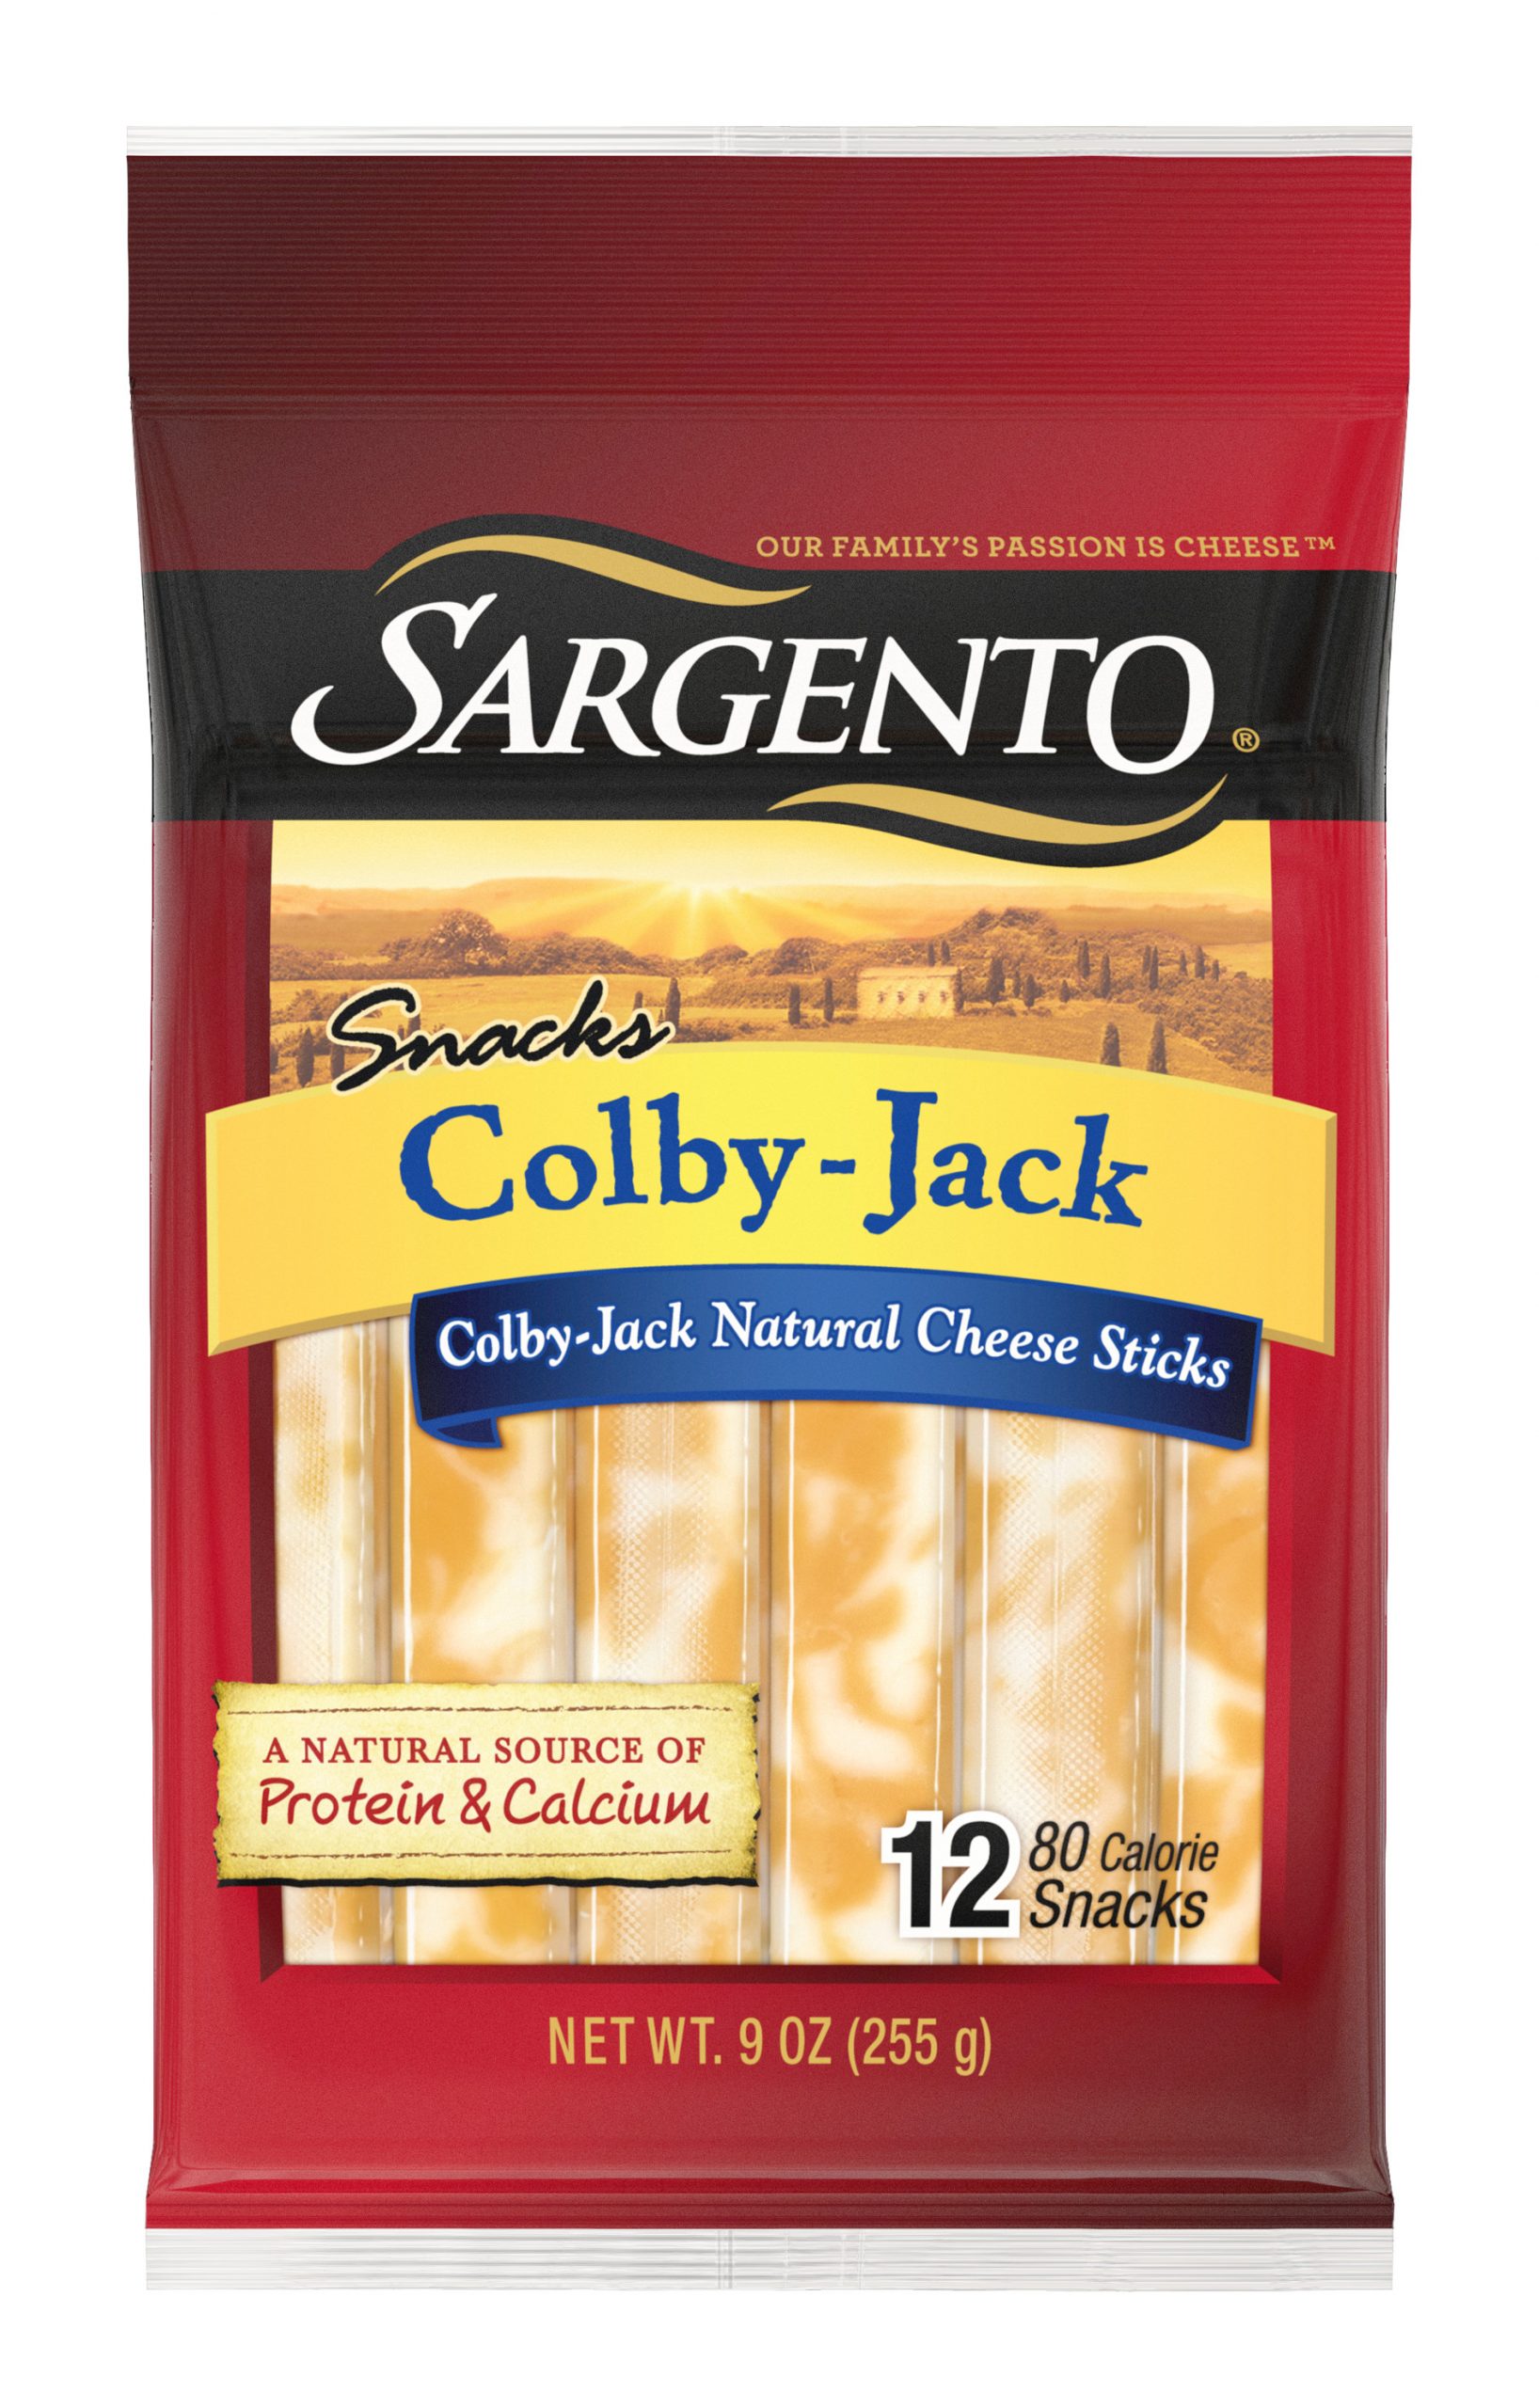 SargentoÂ® Colby